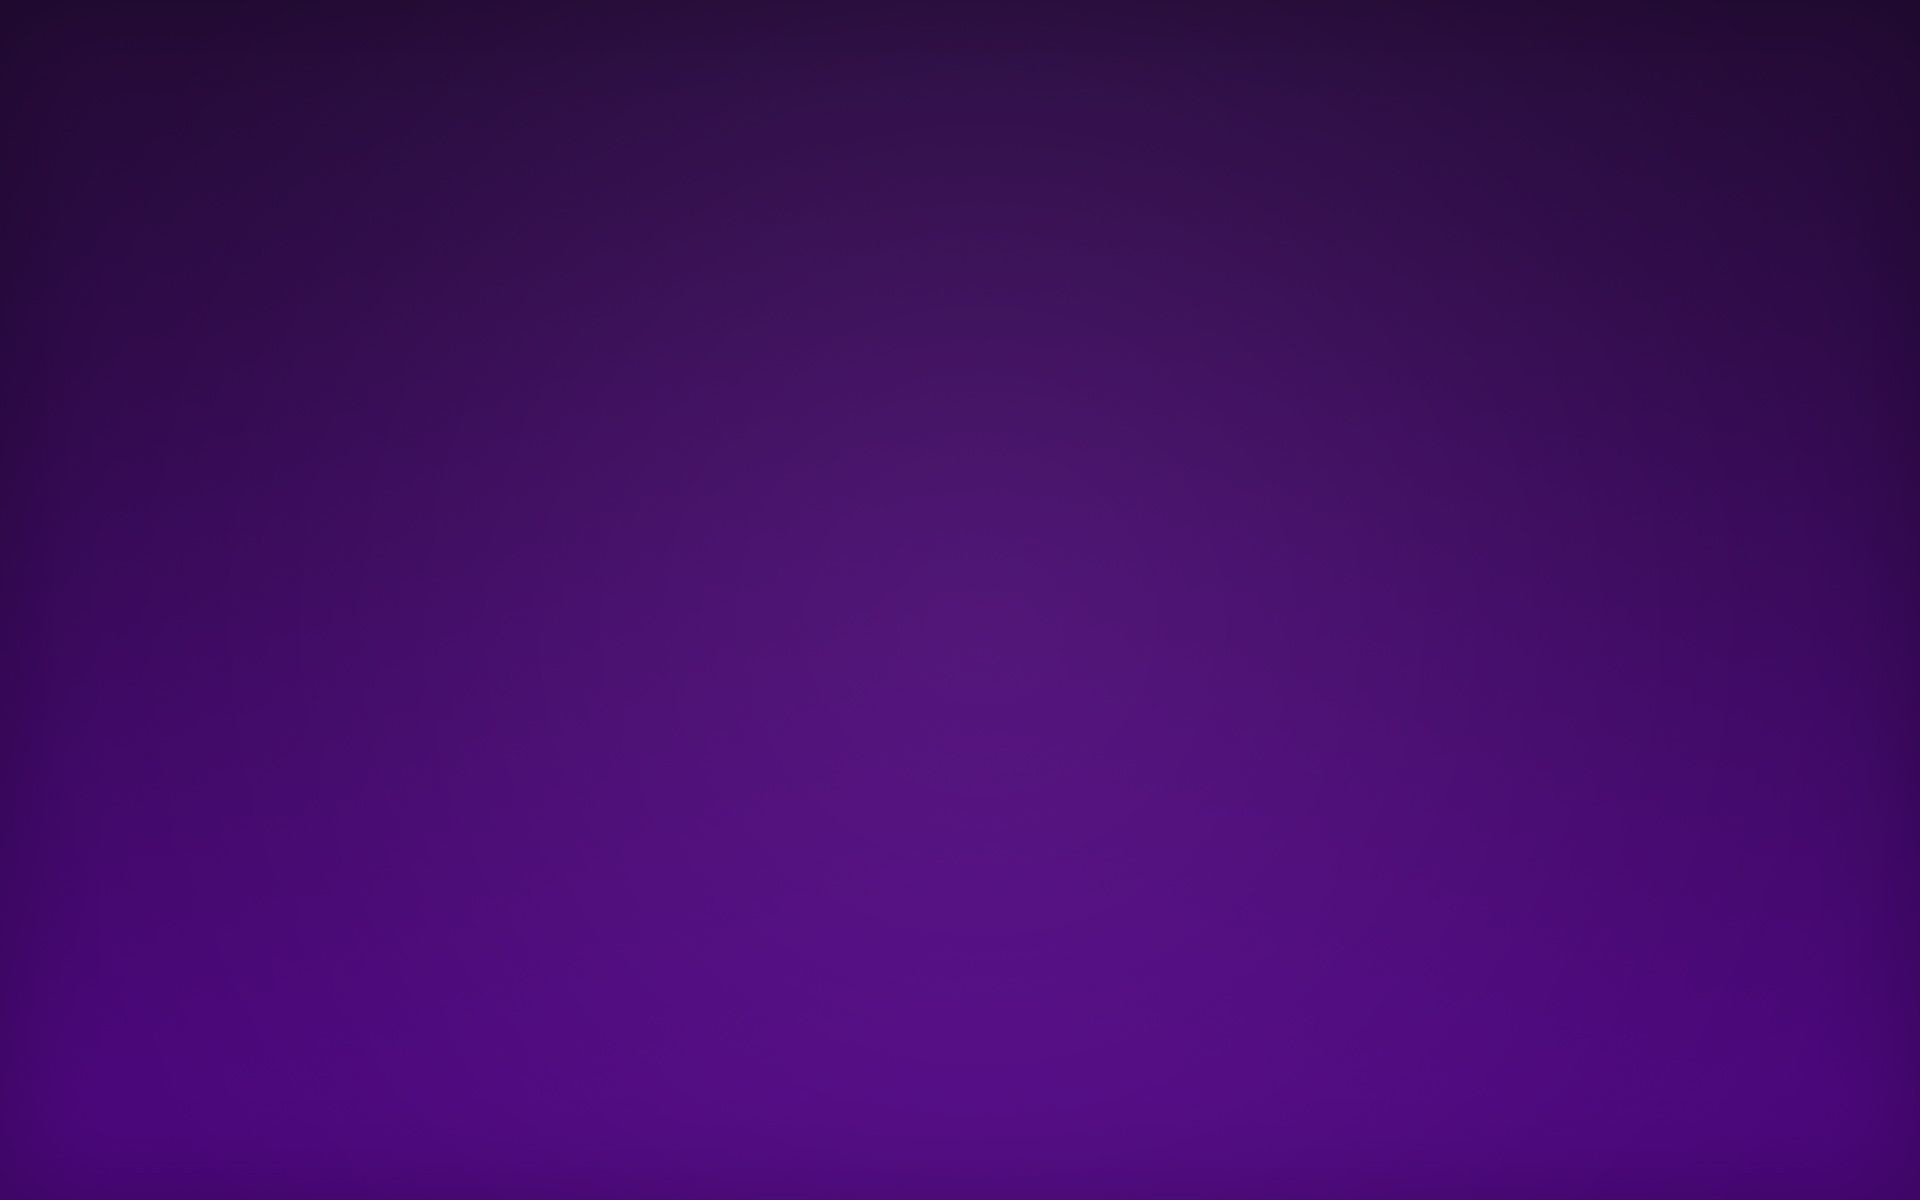 Background Aesthetic Color Purple Wallpaper Image For Free Download   Pngtree